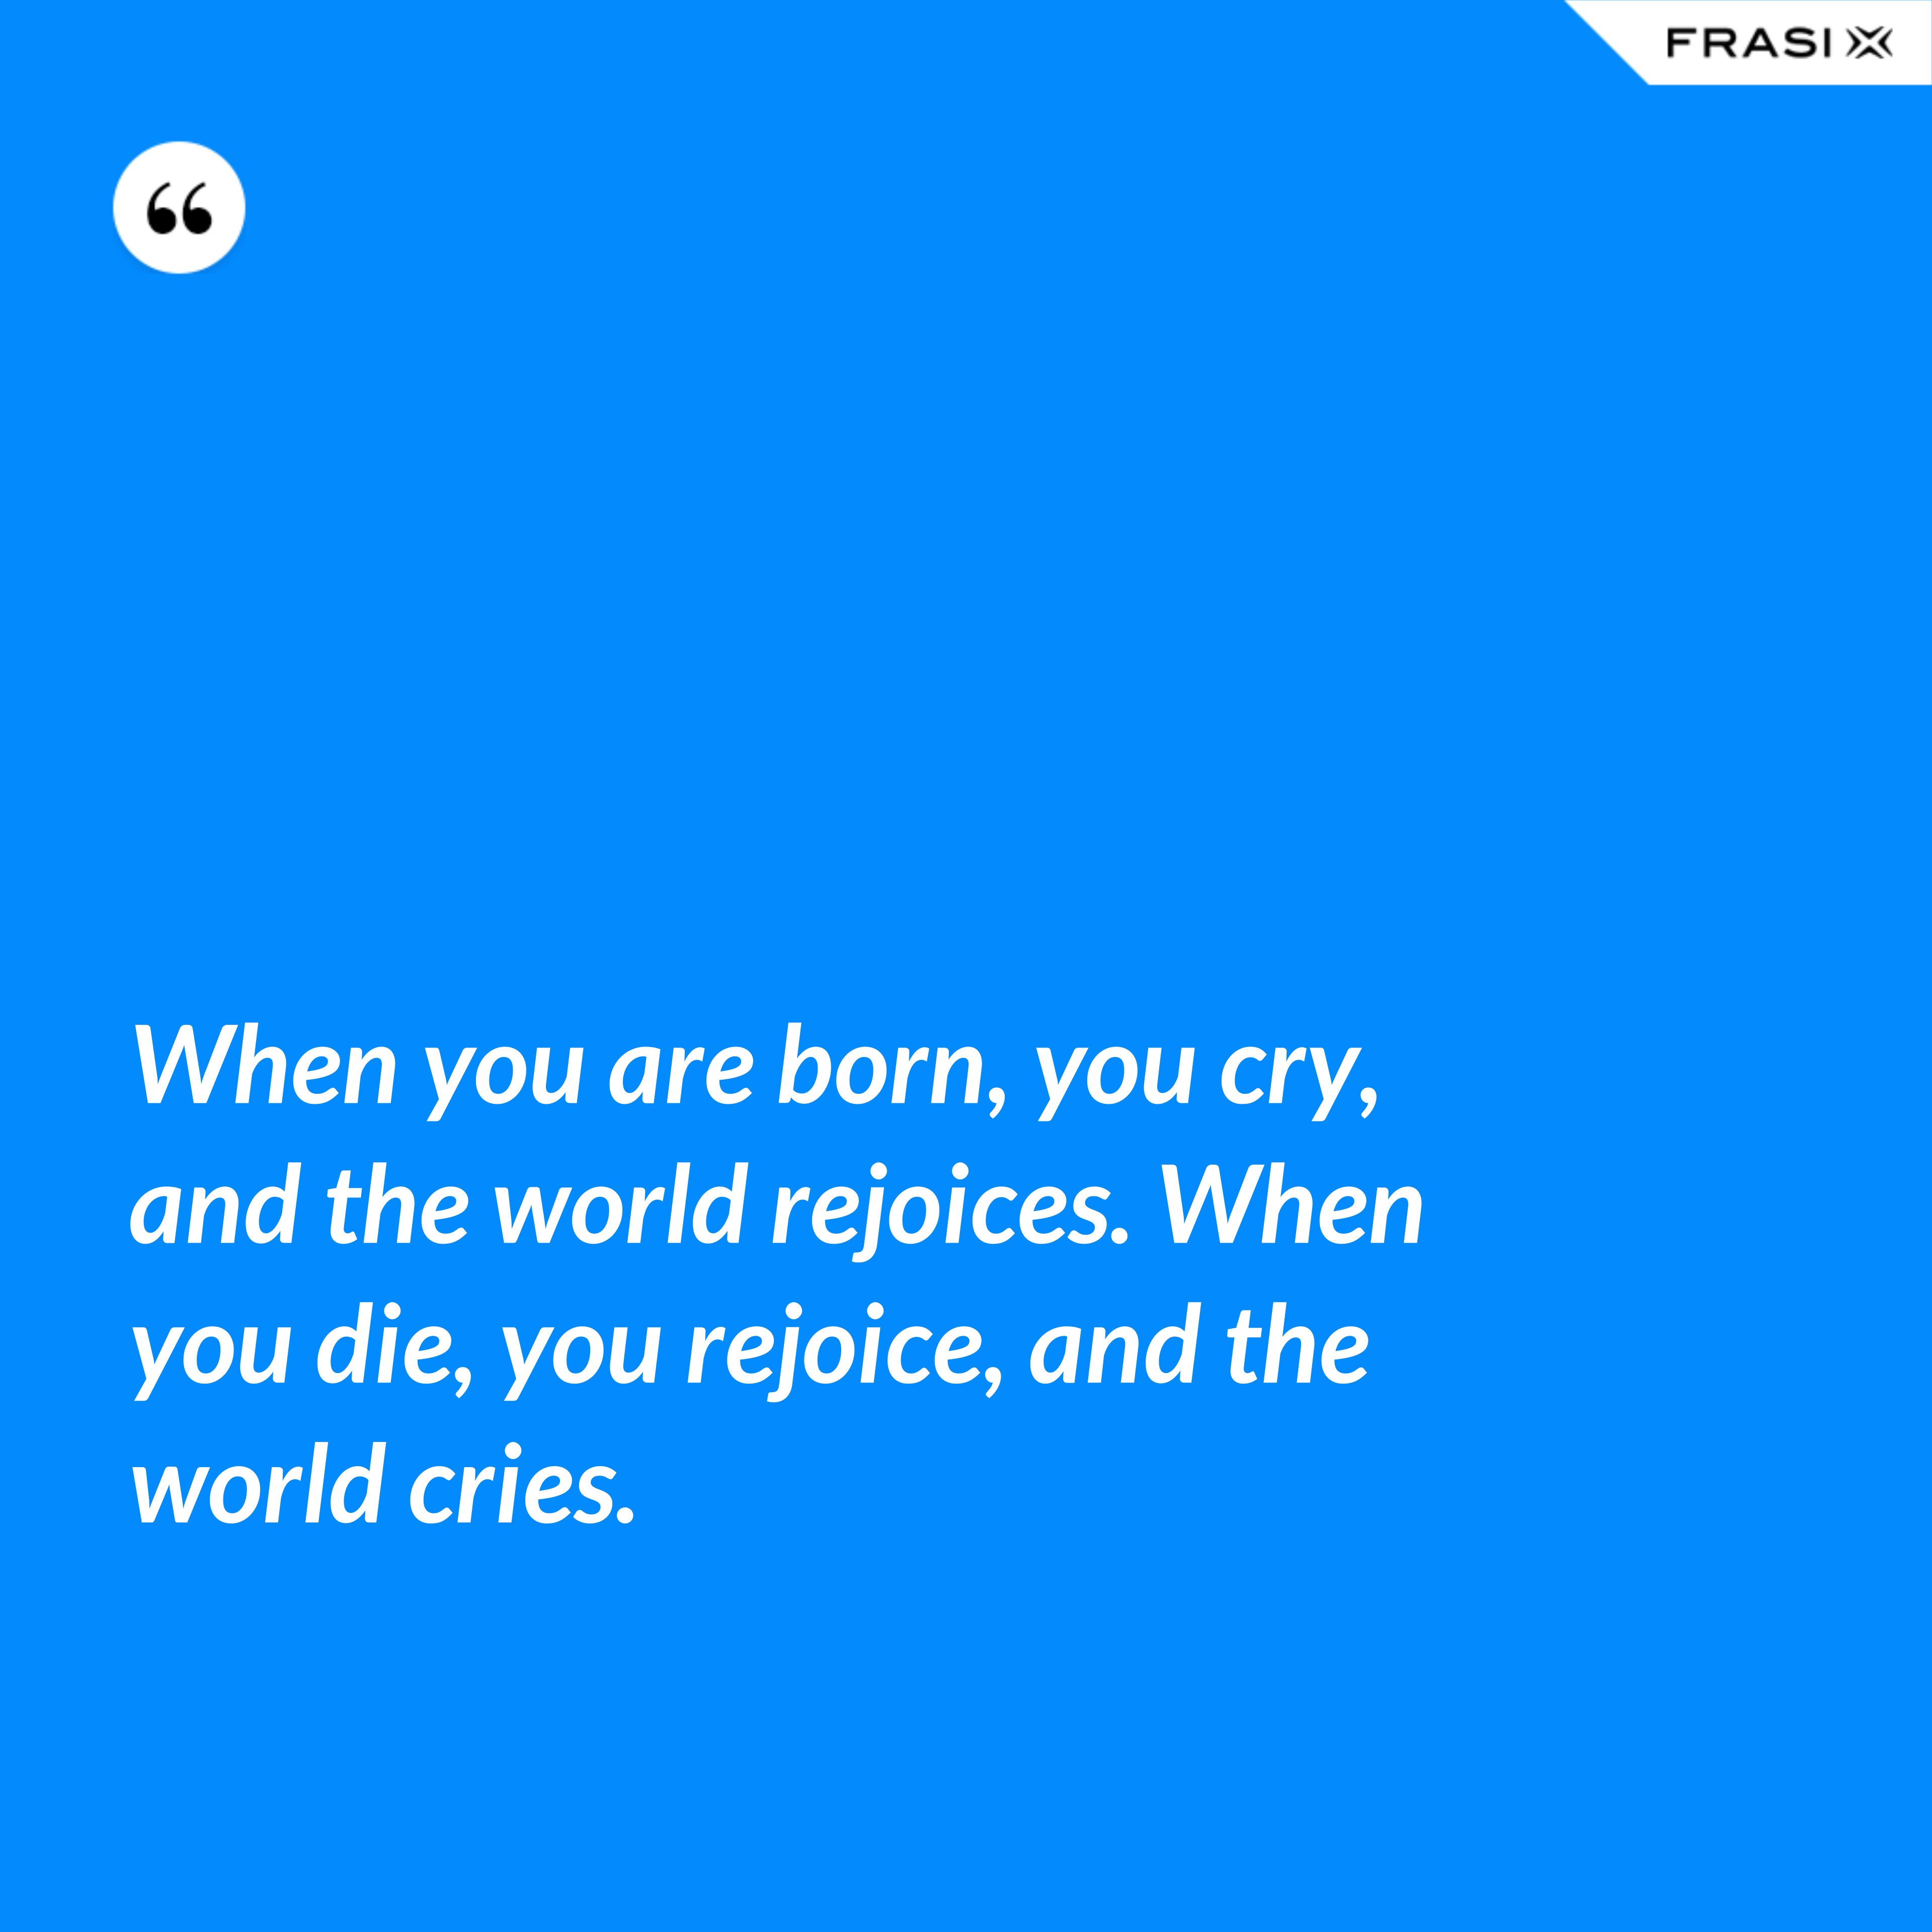 When you are born, you cry, and the world rejoices. When you die, you rejoice, and the world cries. - Anonimo